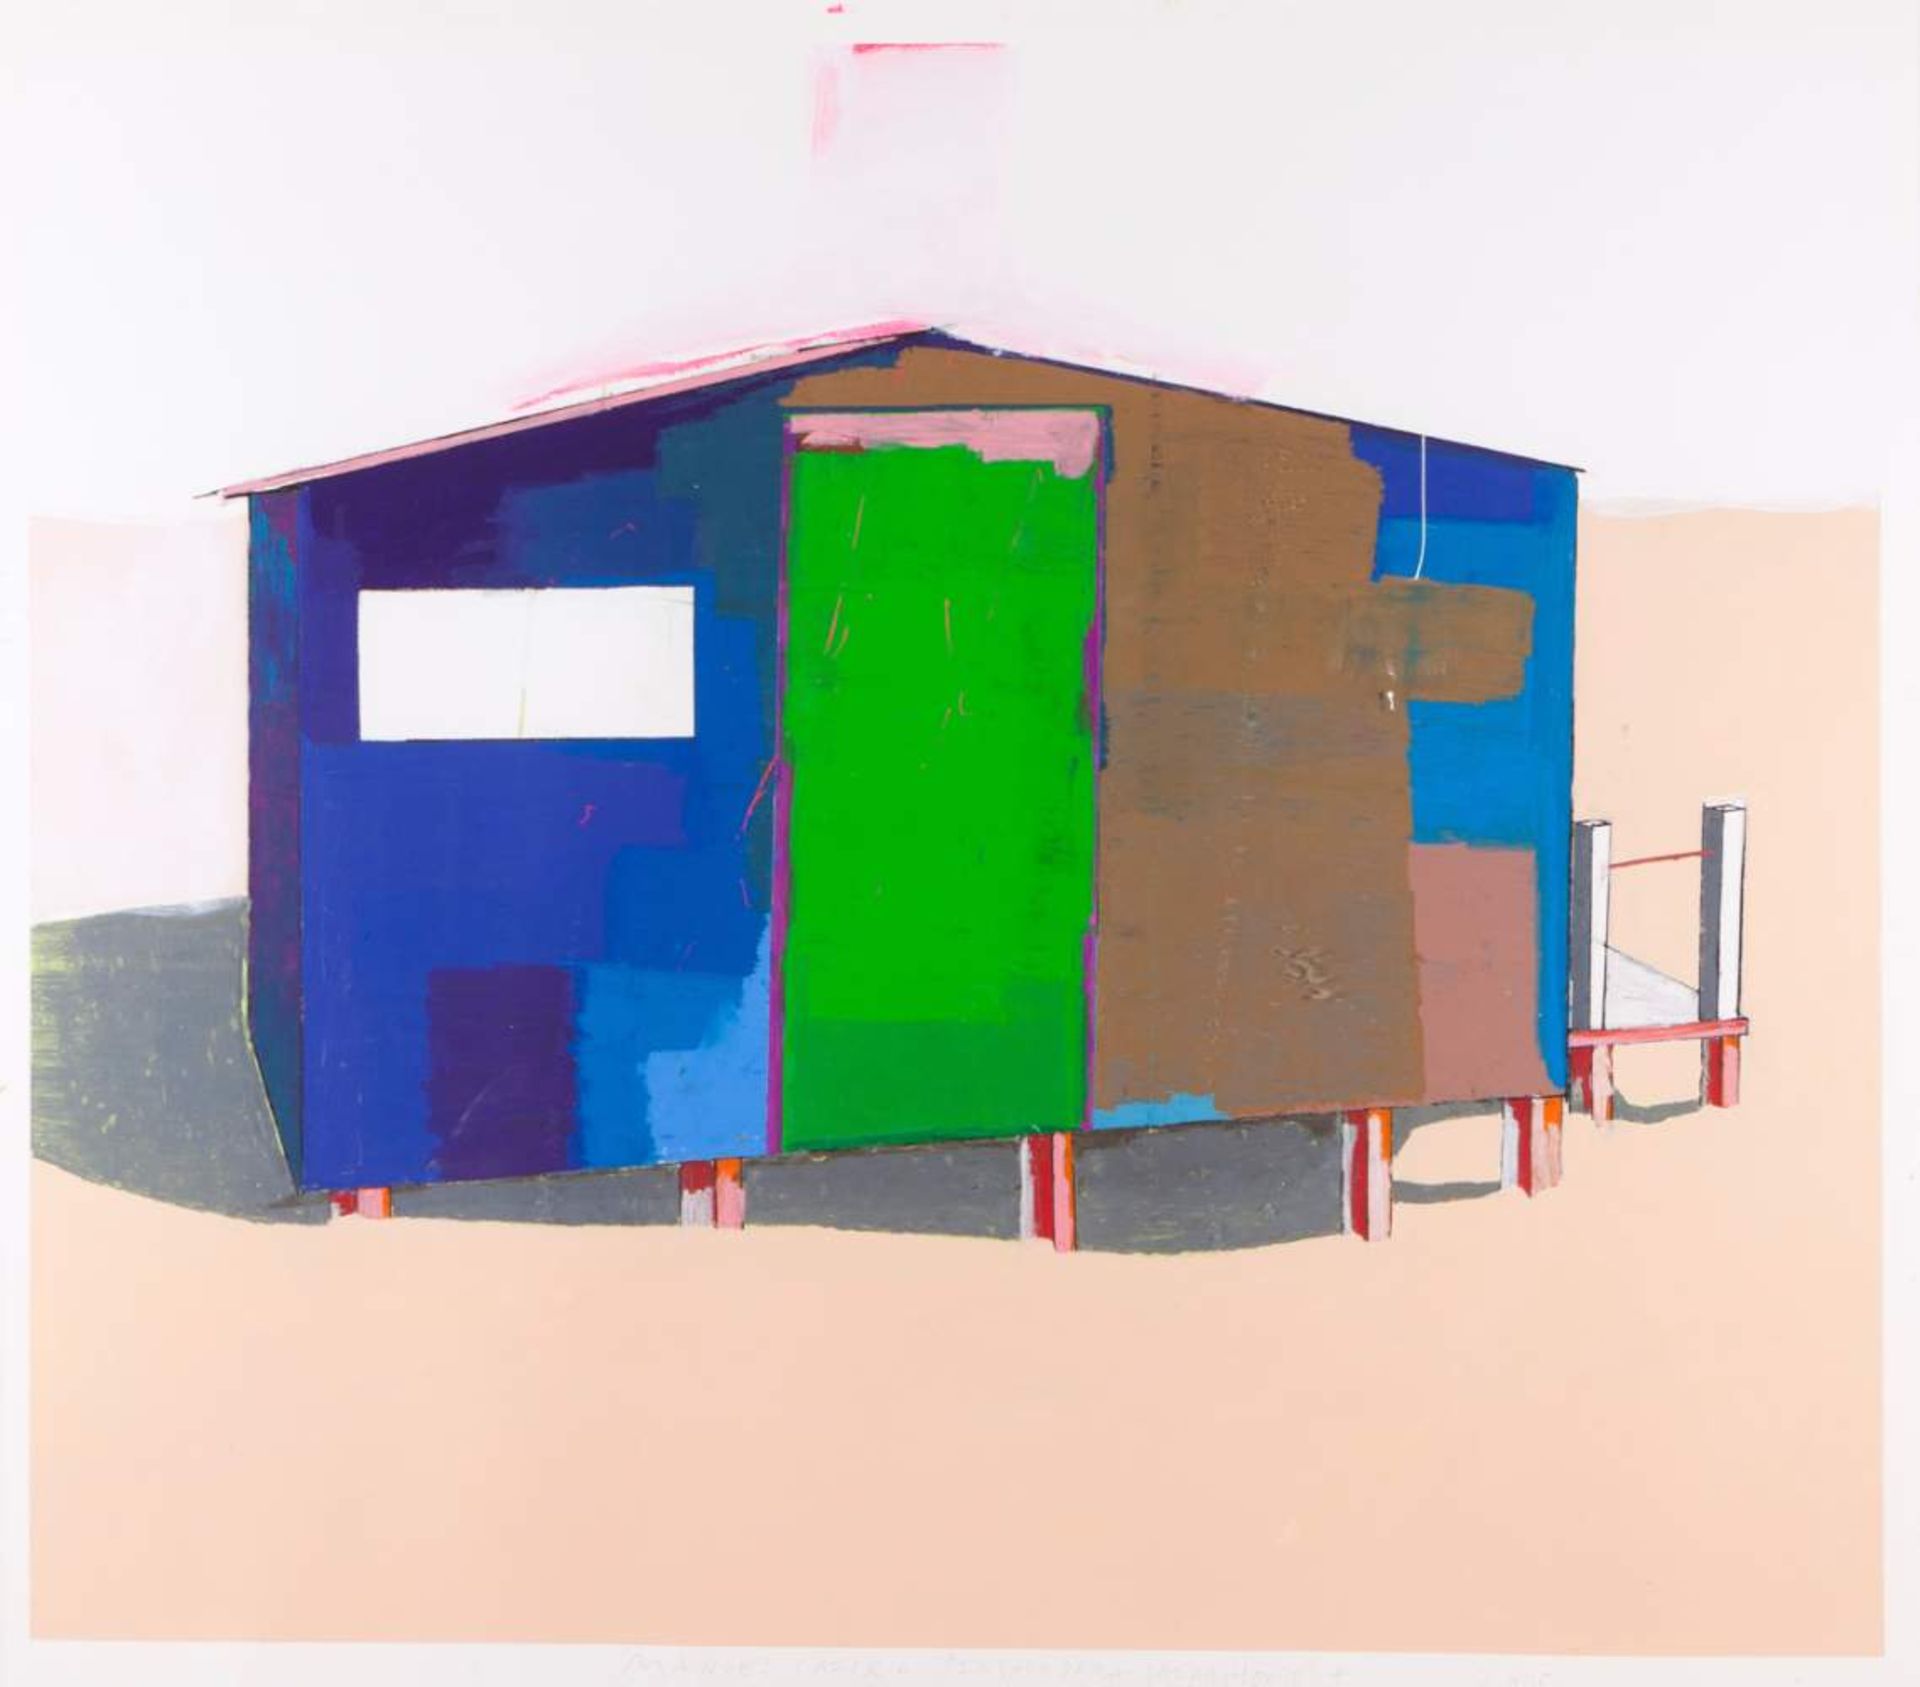 Manuel Caeiro (n.1975)
"Ensaio para Dreamhouse" #
Mixed media on paper
Signed and dated 2005